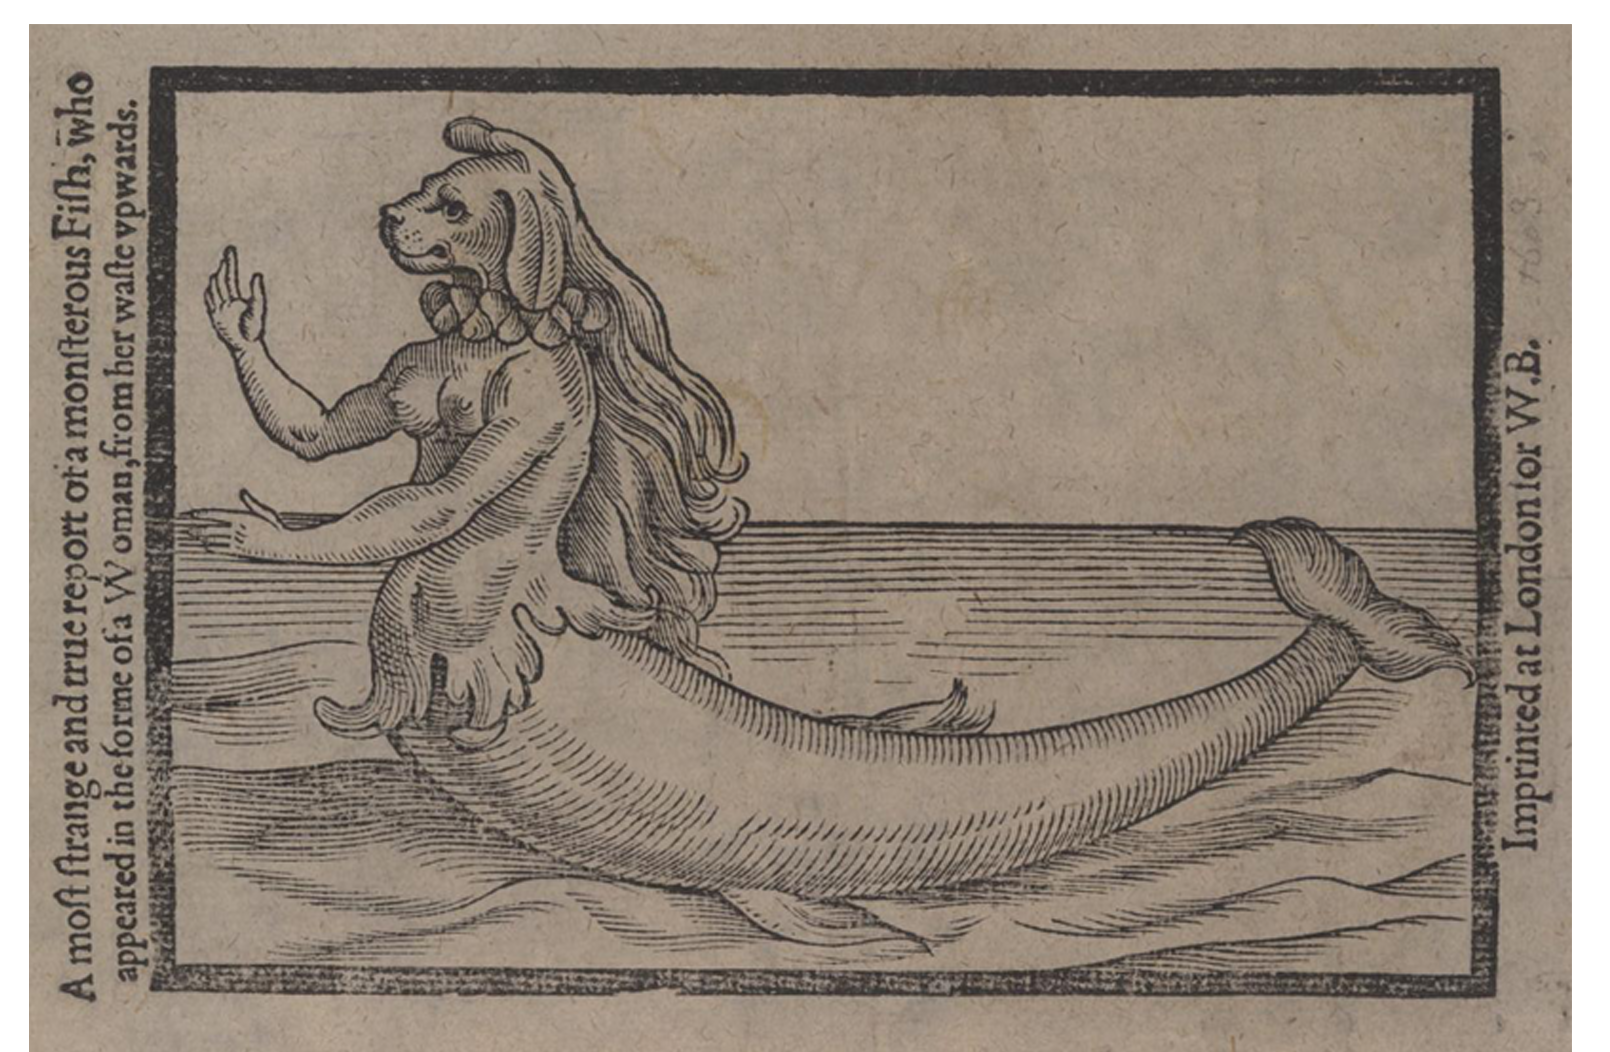 A Fish Woman, a Cyprian Noble, and a Punk Rocker Couple Walk into a Bar: Narratives of Human Experience in Europeana